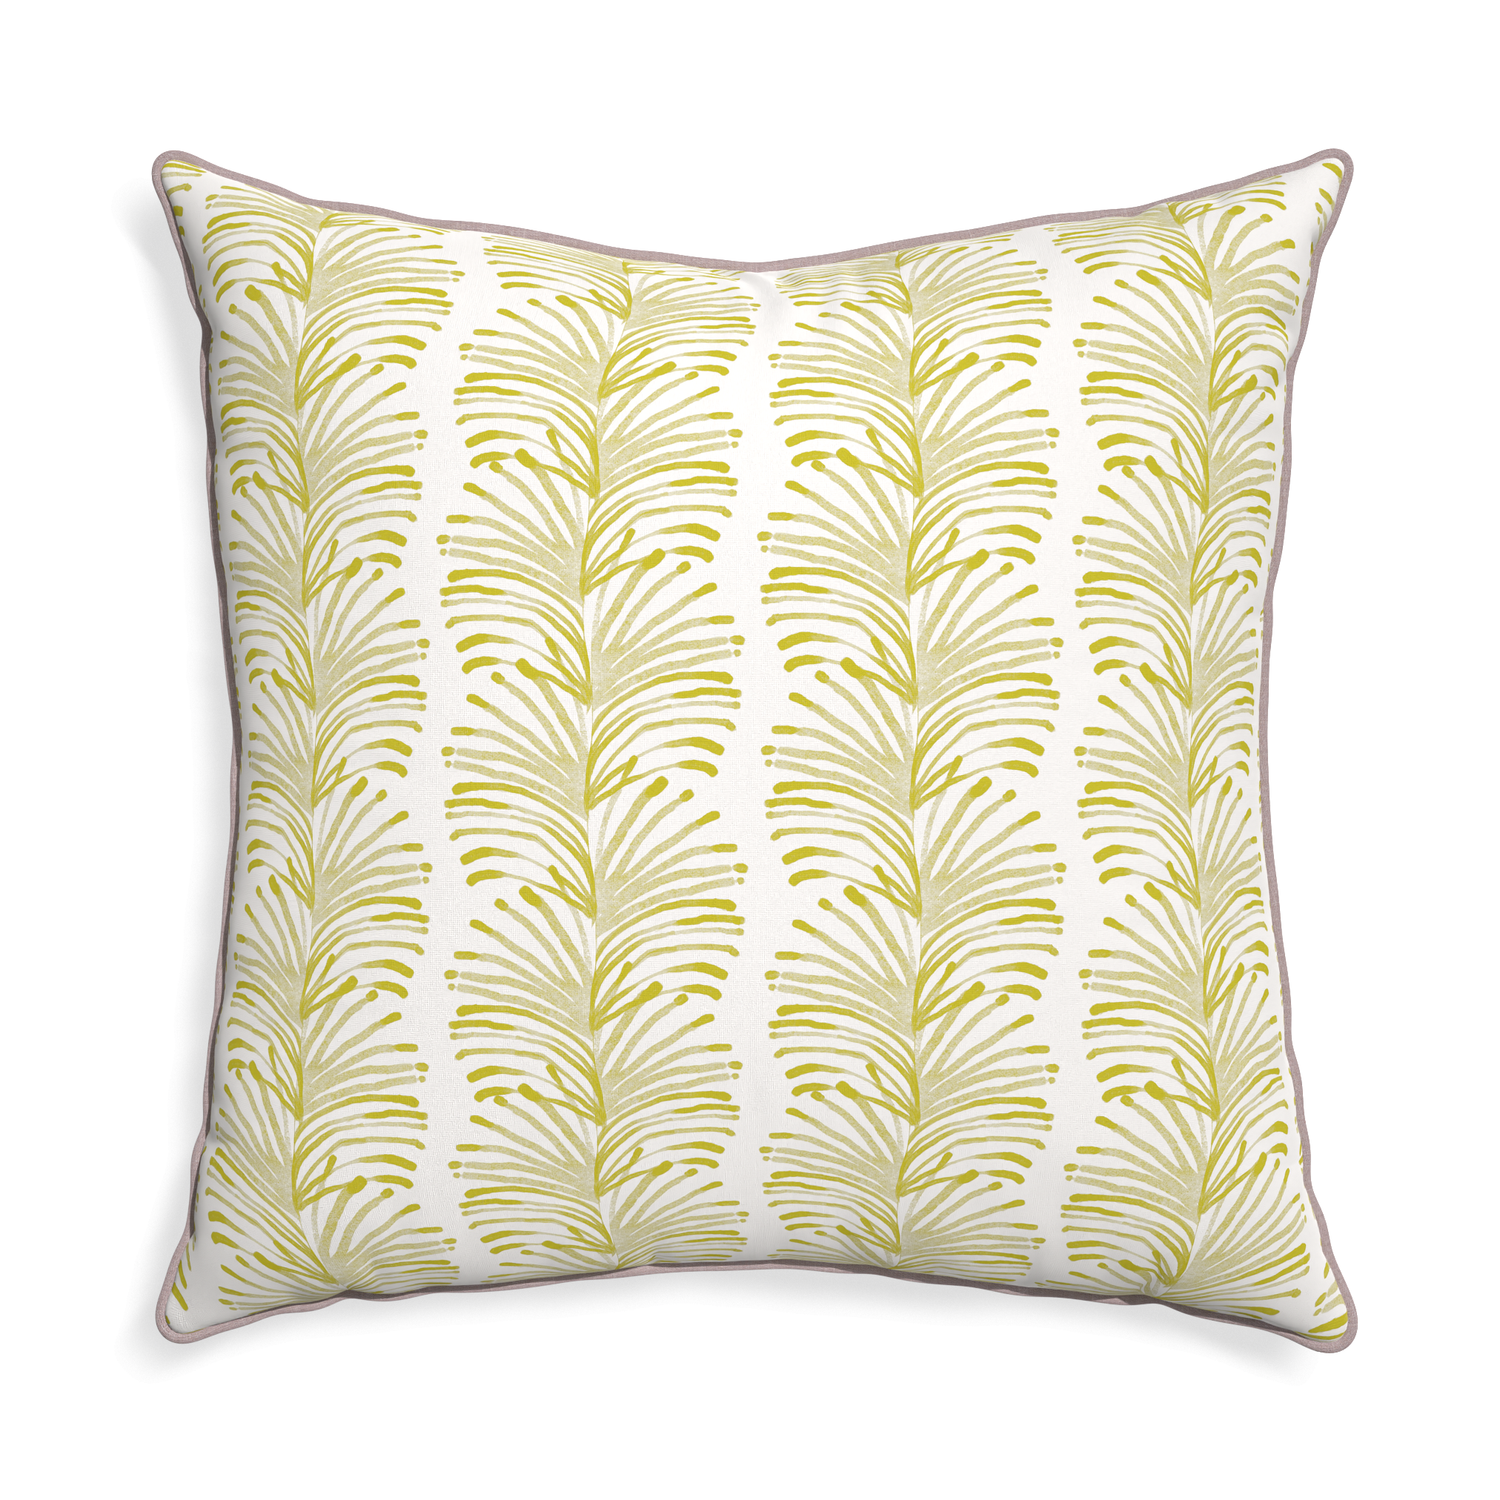 Euro-sham emma chartreuse custom yellow stripe chartreusepillow with orchid piping on white background